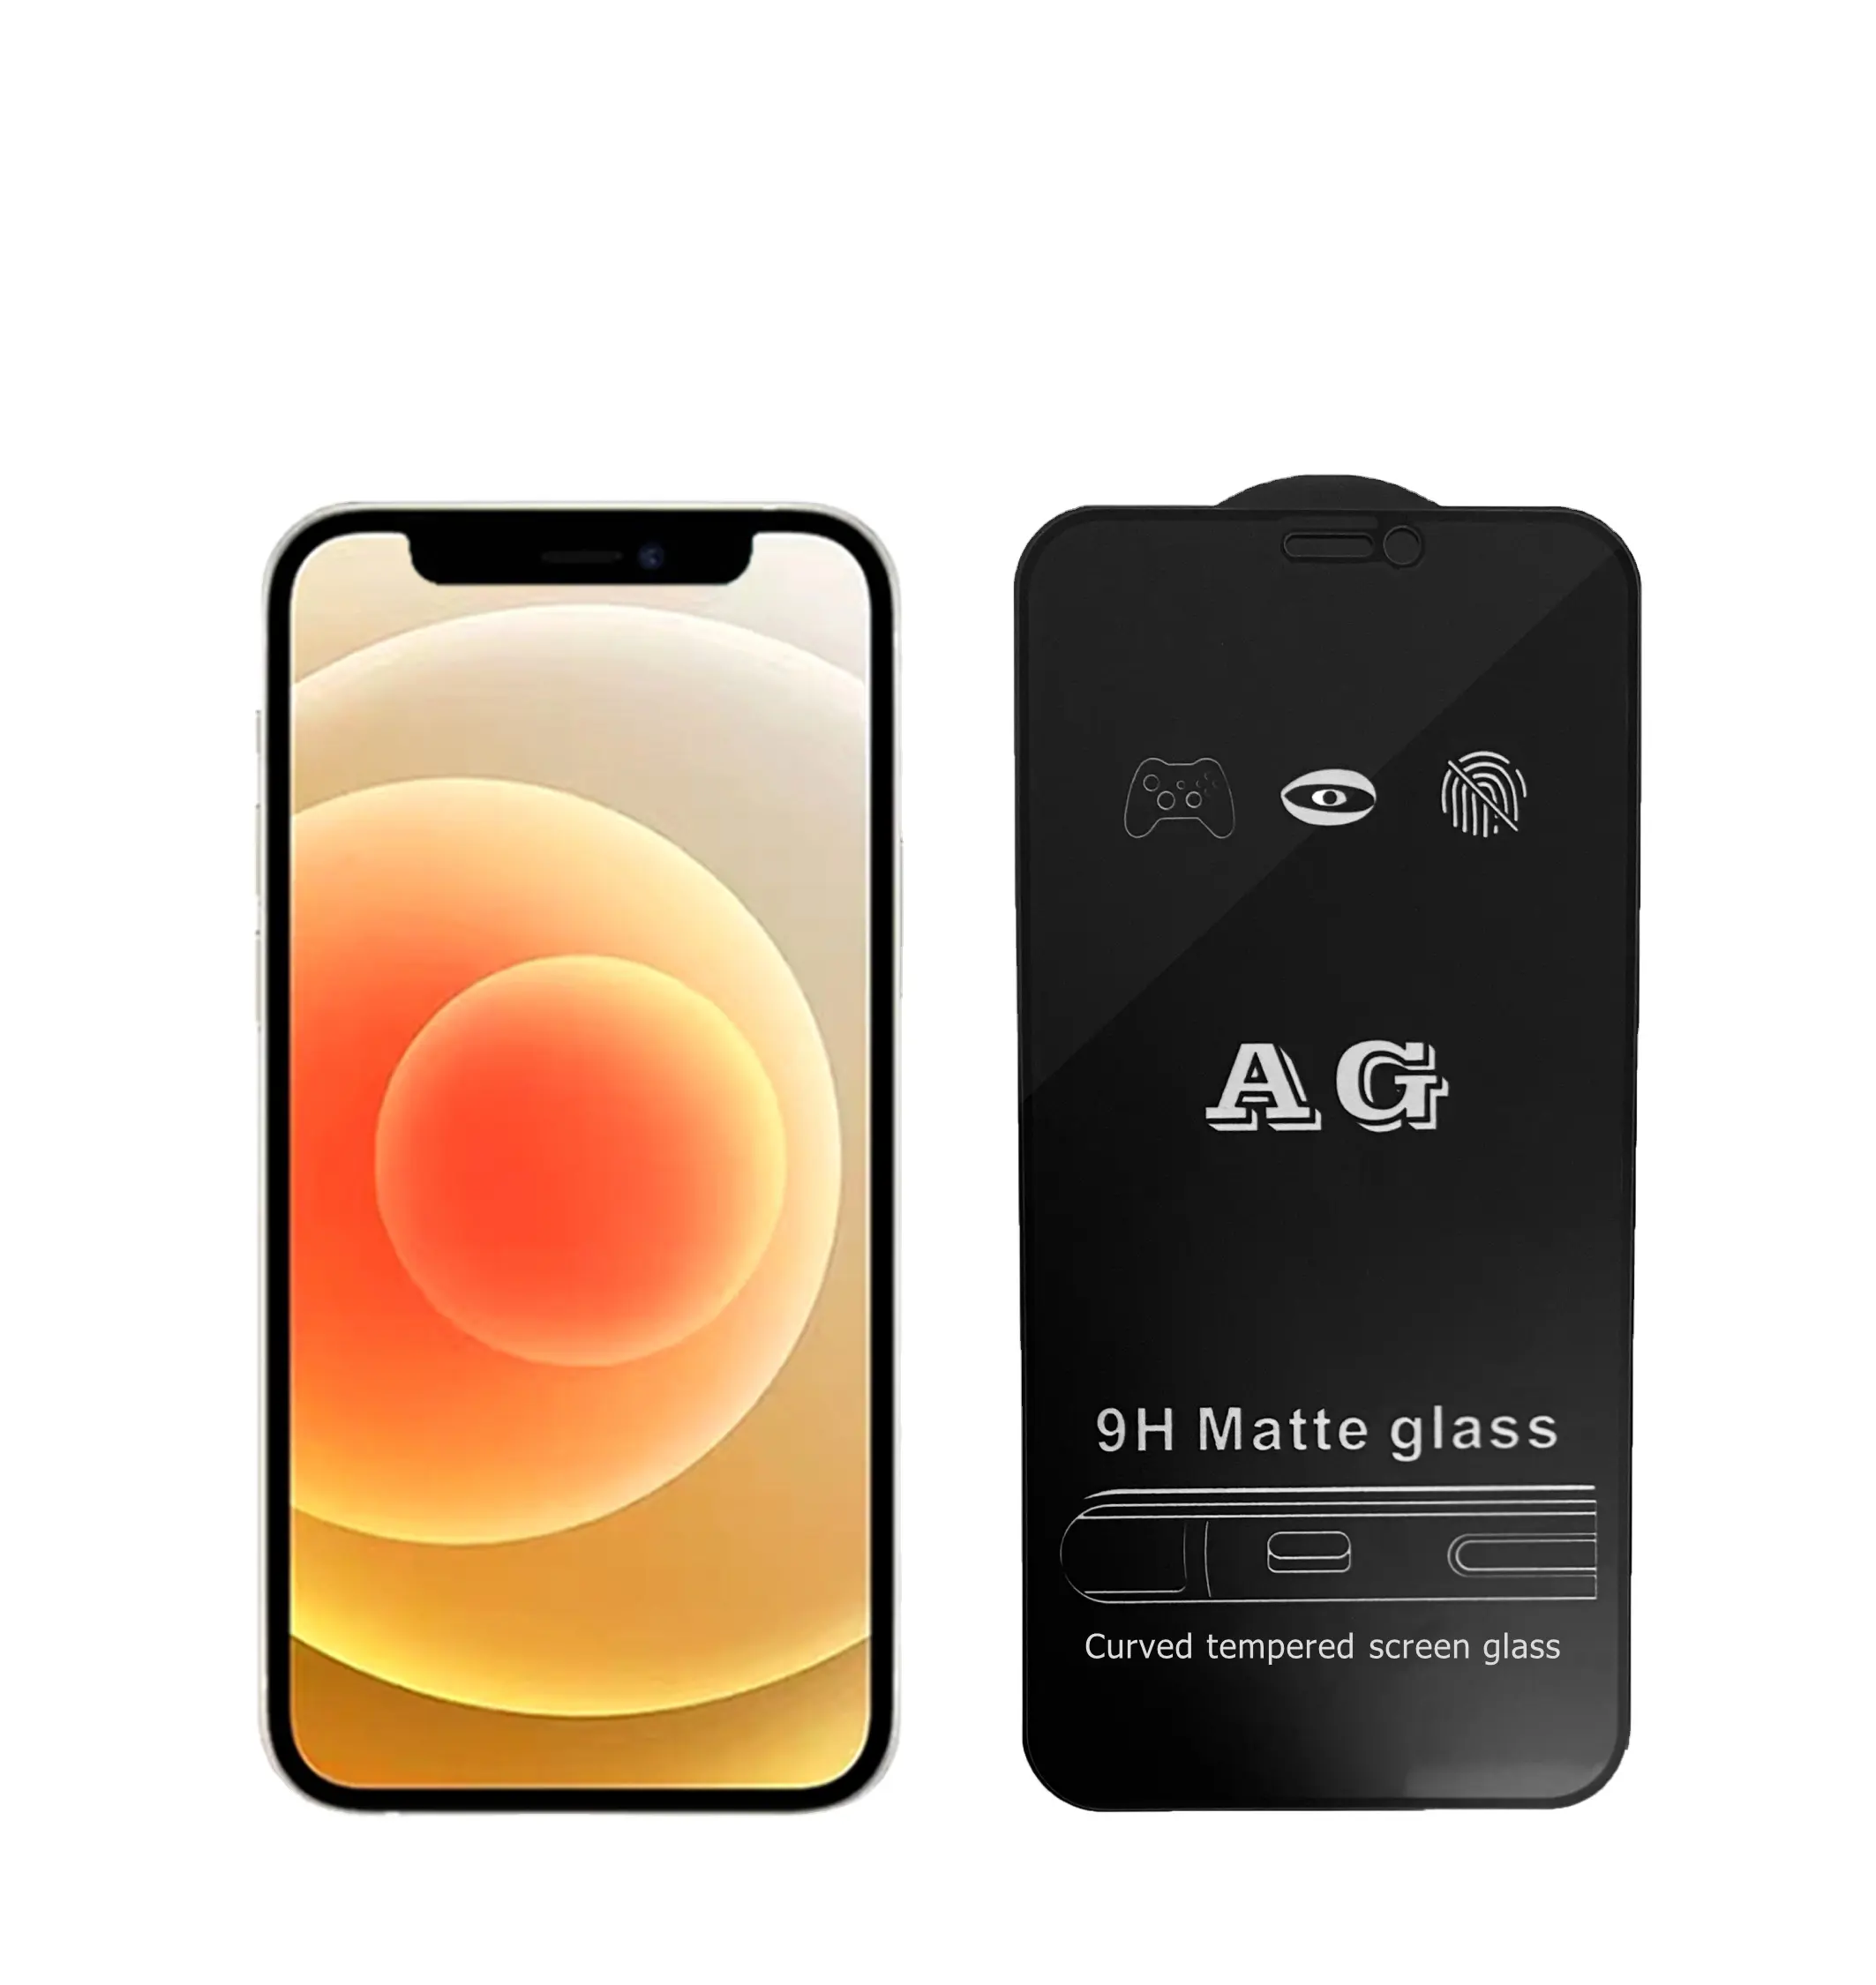 AG Full Cover Anti Fingerprint Screen Protector Matte Tempered Glass For iPhone X For iPhone 12 Pro max phone